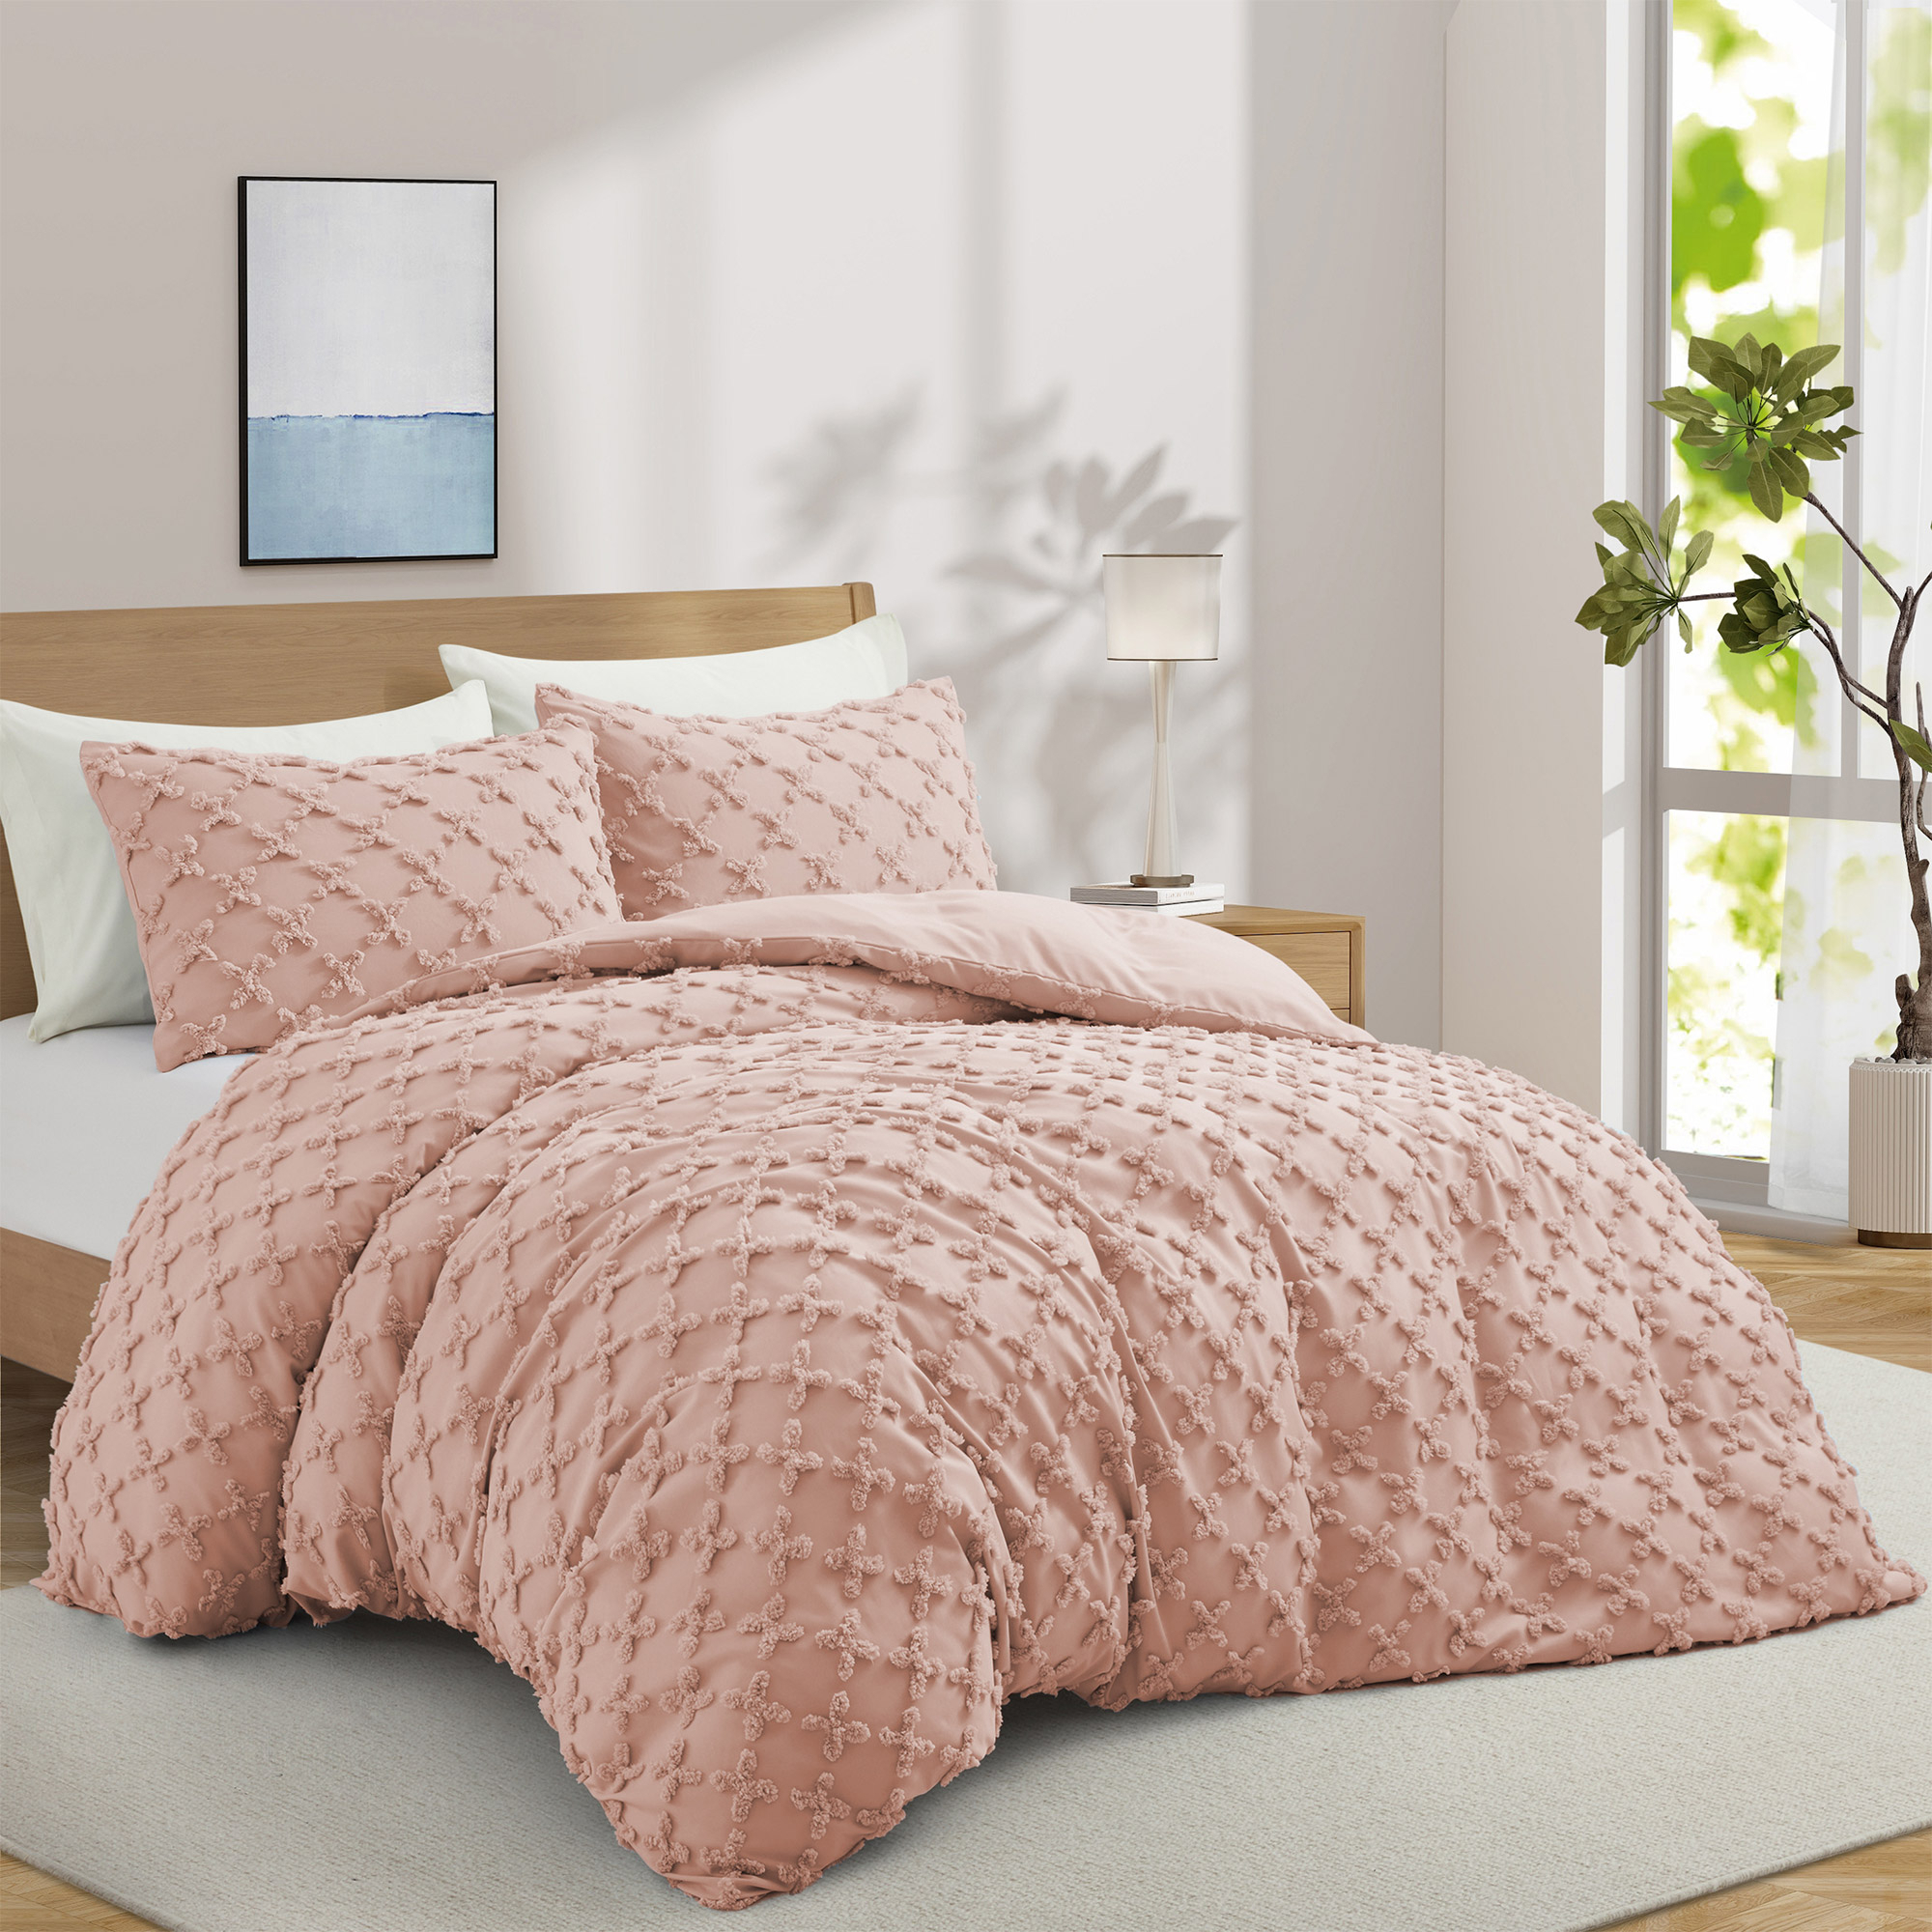 2 Or 3 Piece Soft Microfiber Clipped Duvet Cover Set With Shams - Crystal Pink, Full/Queen-90*90